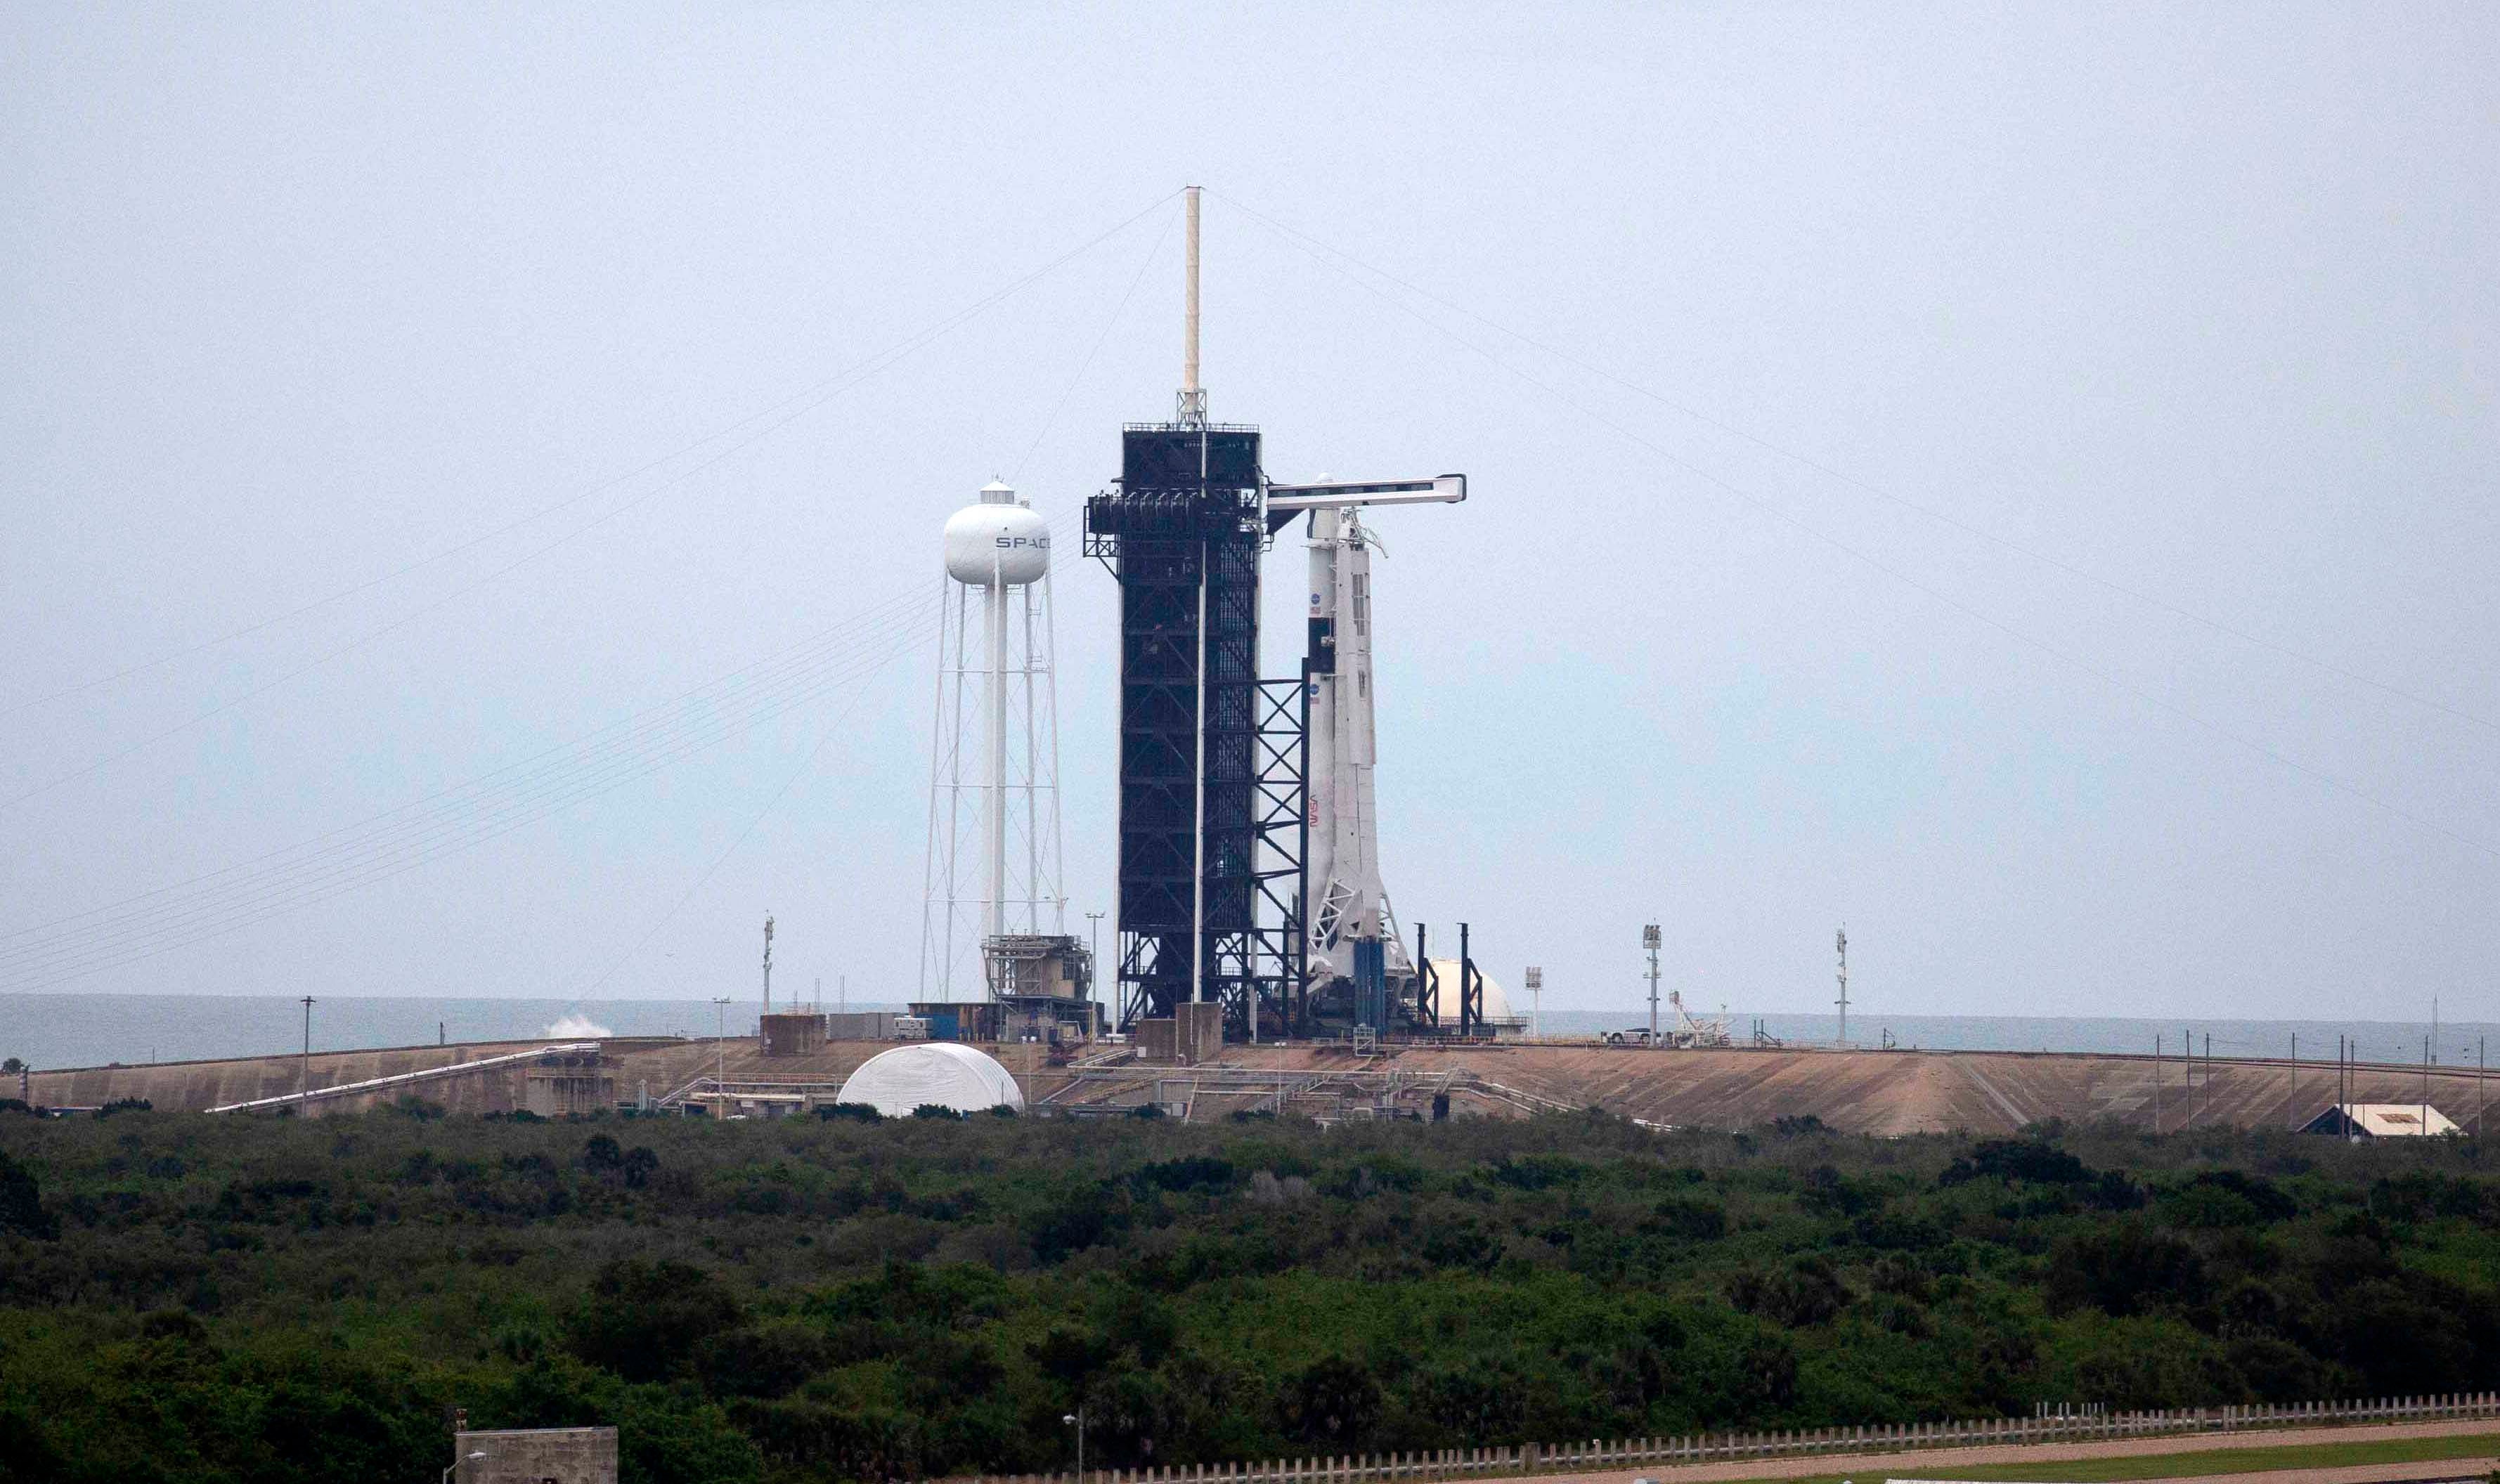 File: SpaceX Falcon 9 rocket with Crew Dragon spacecraft sits on launch pad 39A at the Kennedy Space Center on 27 May 2020 in Cape Canaveral, Florida